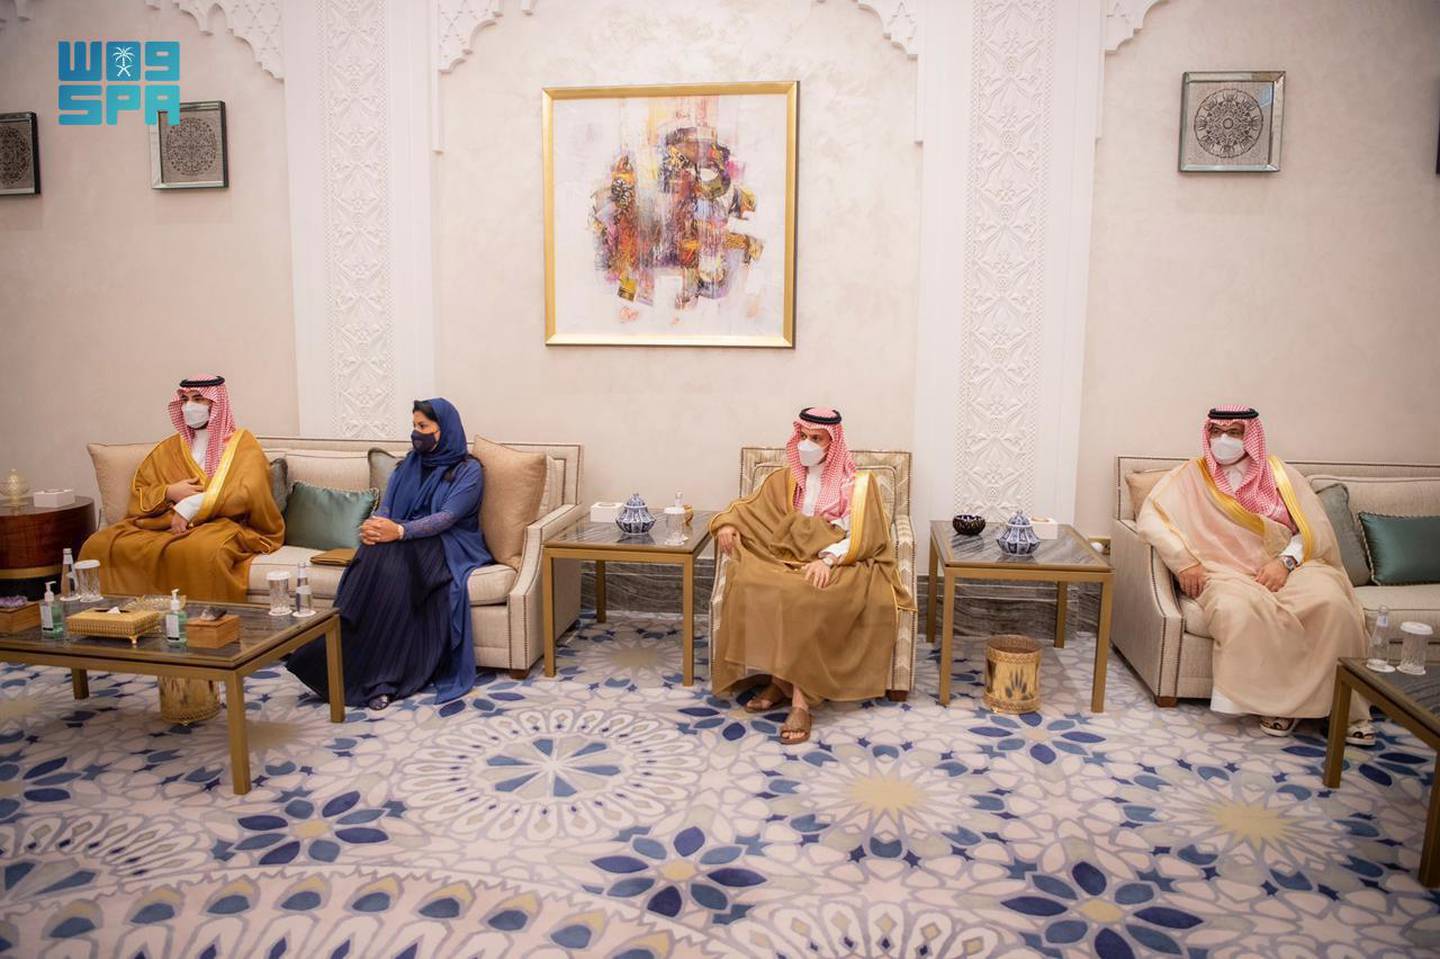 Saudi Crown Prince Mohammed bin Salman meets with US Special Envoy for Yemen Tim Lenderking. The meeting was attended by the Saudi Deputy Defense Minister Prince Khalid bin Salman, the Saudi Ambassador to the US Princess Reema bint Bandar bin Sultan, the Saudi Foreign Minister Prince Faisal bin Farhan, and the Saudi Ambassador to Yemen Mohammed Al-Jaber. SPA